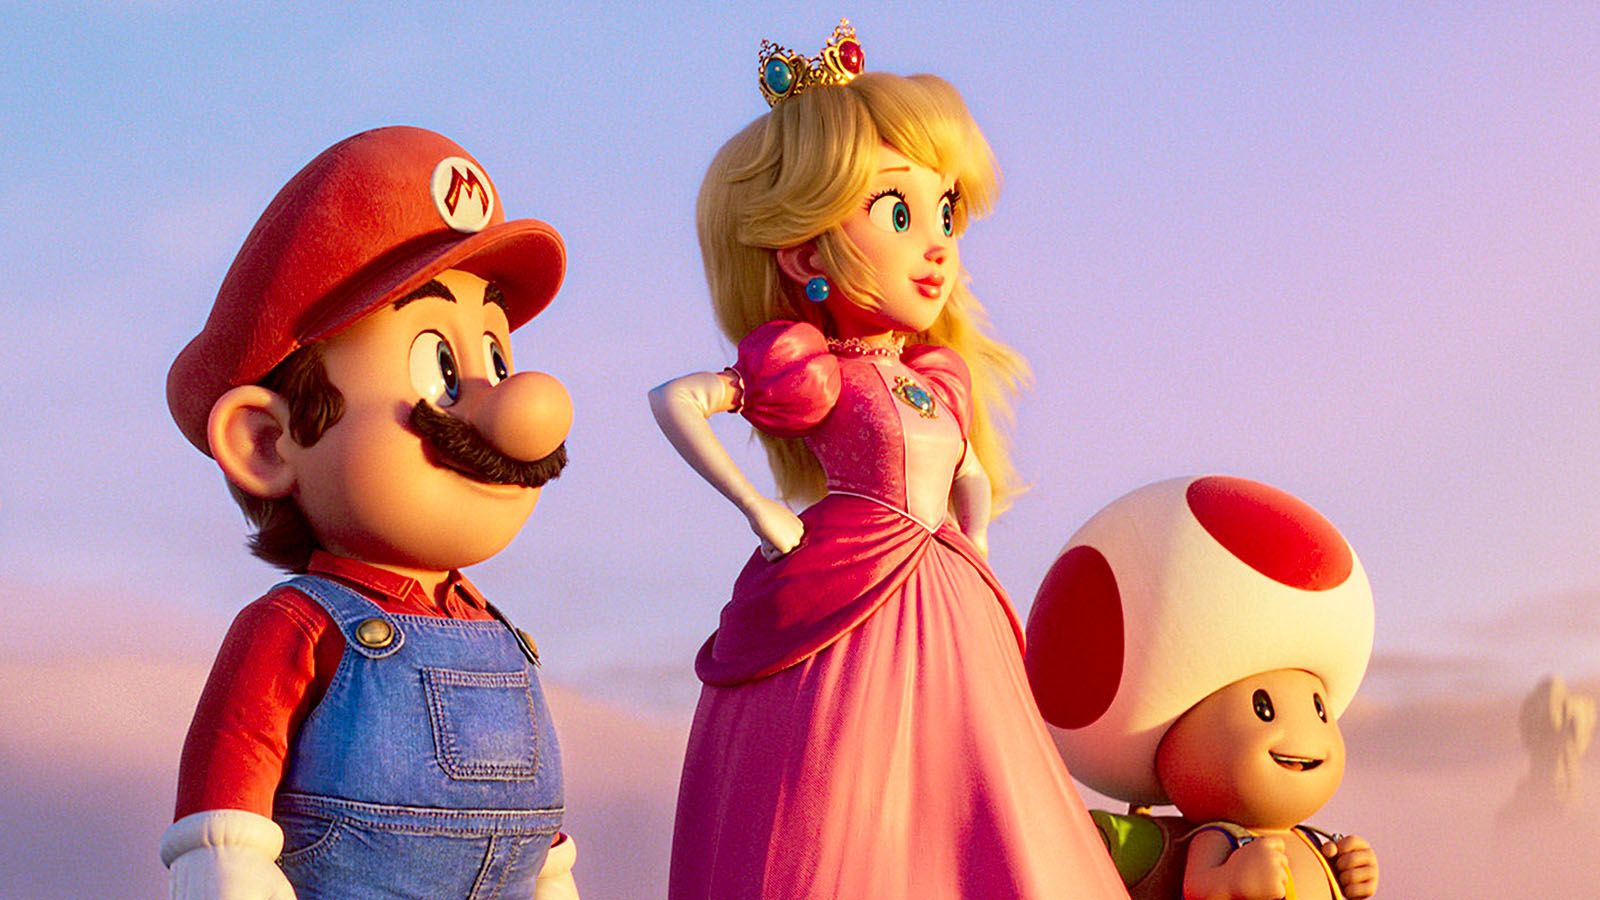 The Super Mario Bros. Movie features the voices of, from left, Chris Pratt (Mario), Anya Taylor-Joy (Peach), and Keegan-Michael Key (Toad).